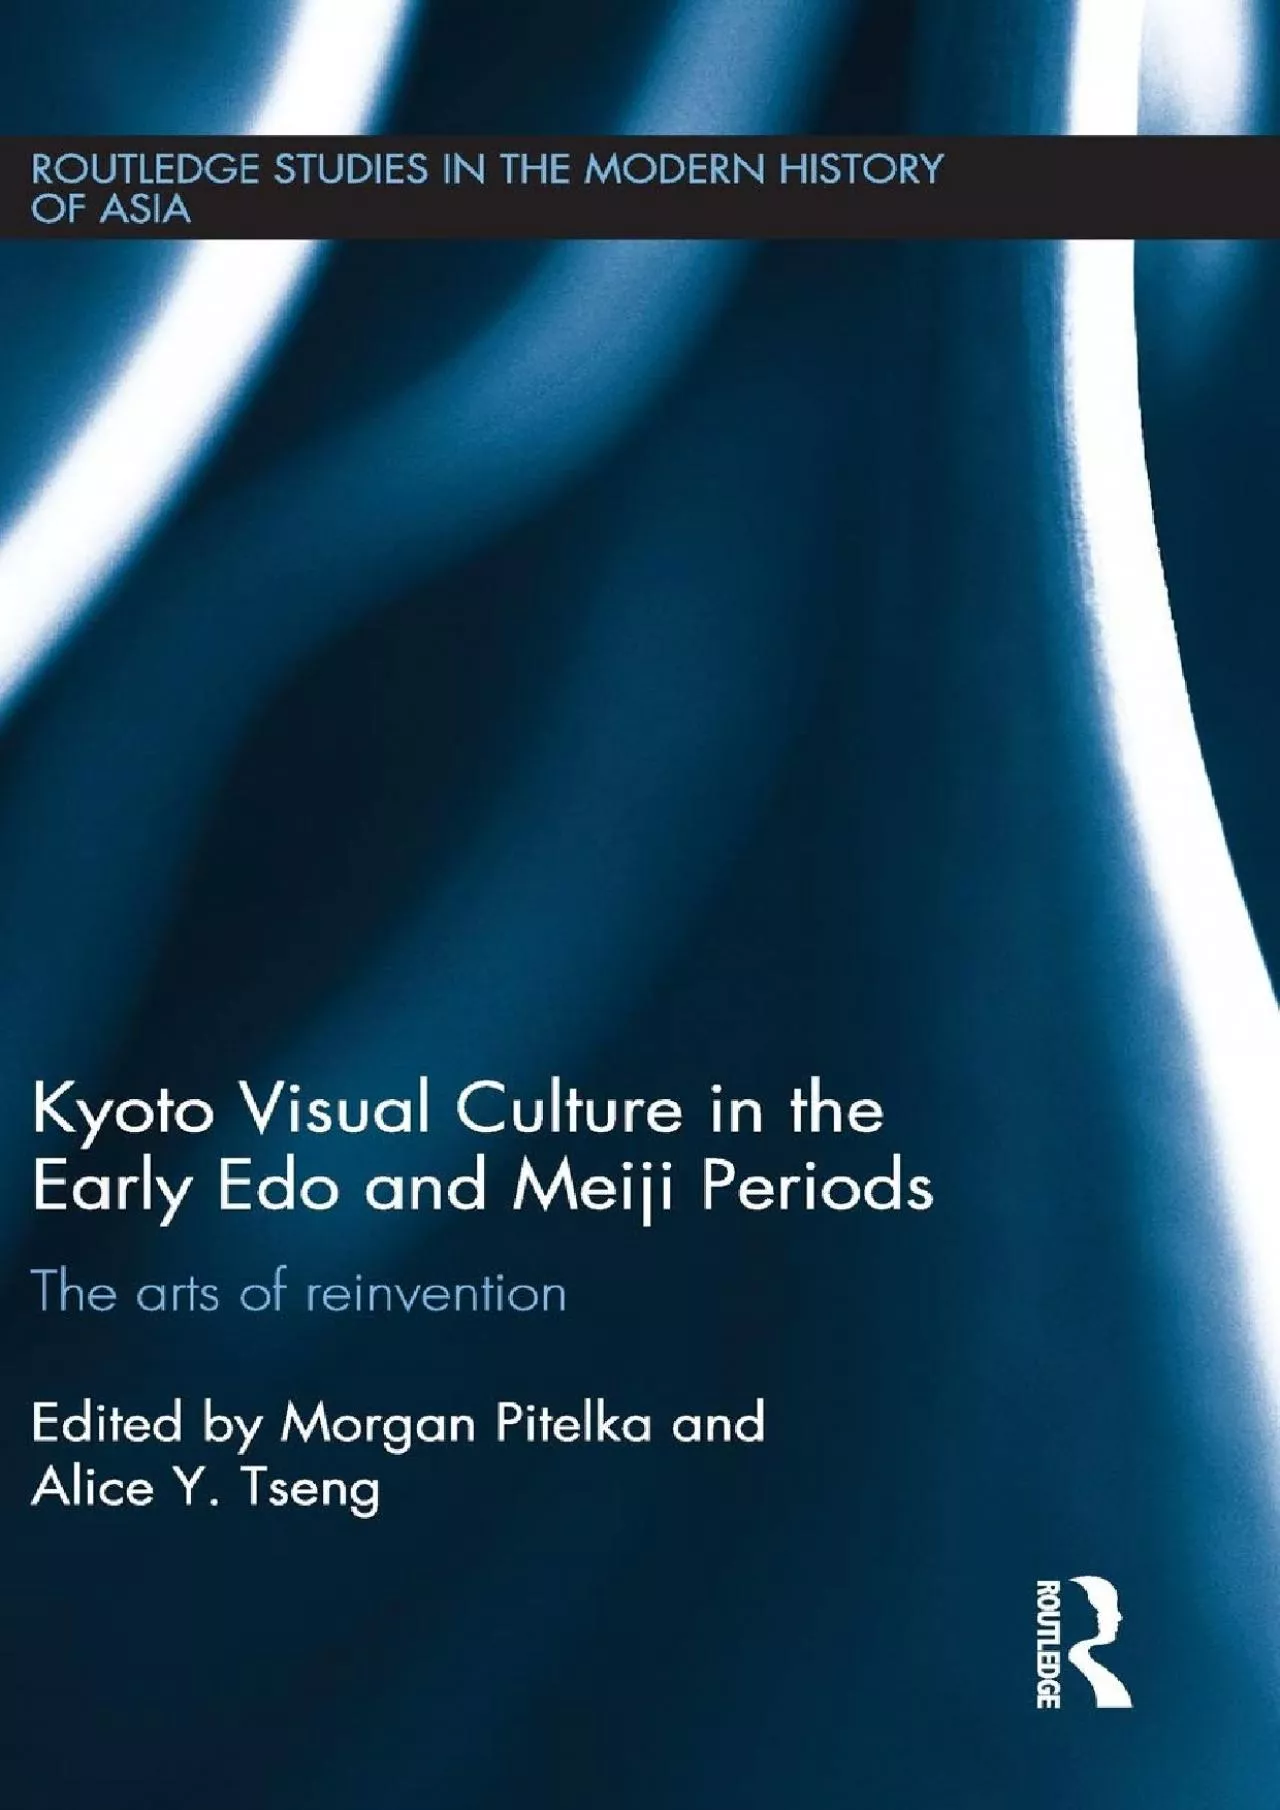 [BOOK]-Kyoto Visual Culture in the Early Edo and Meiji Periods: The arts of reinvention